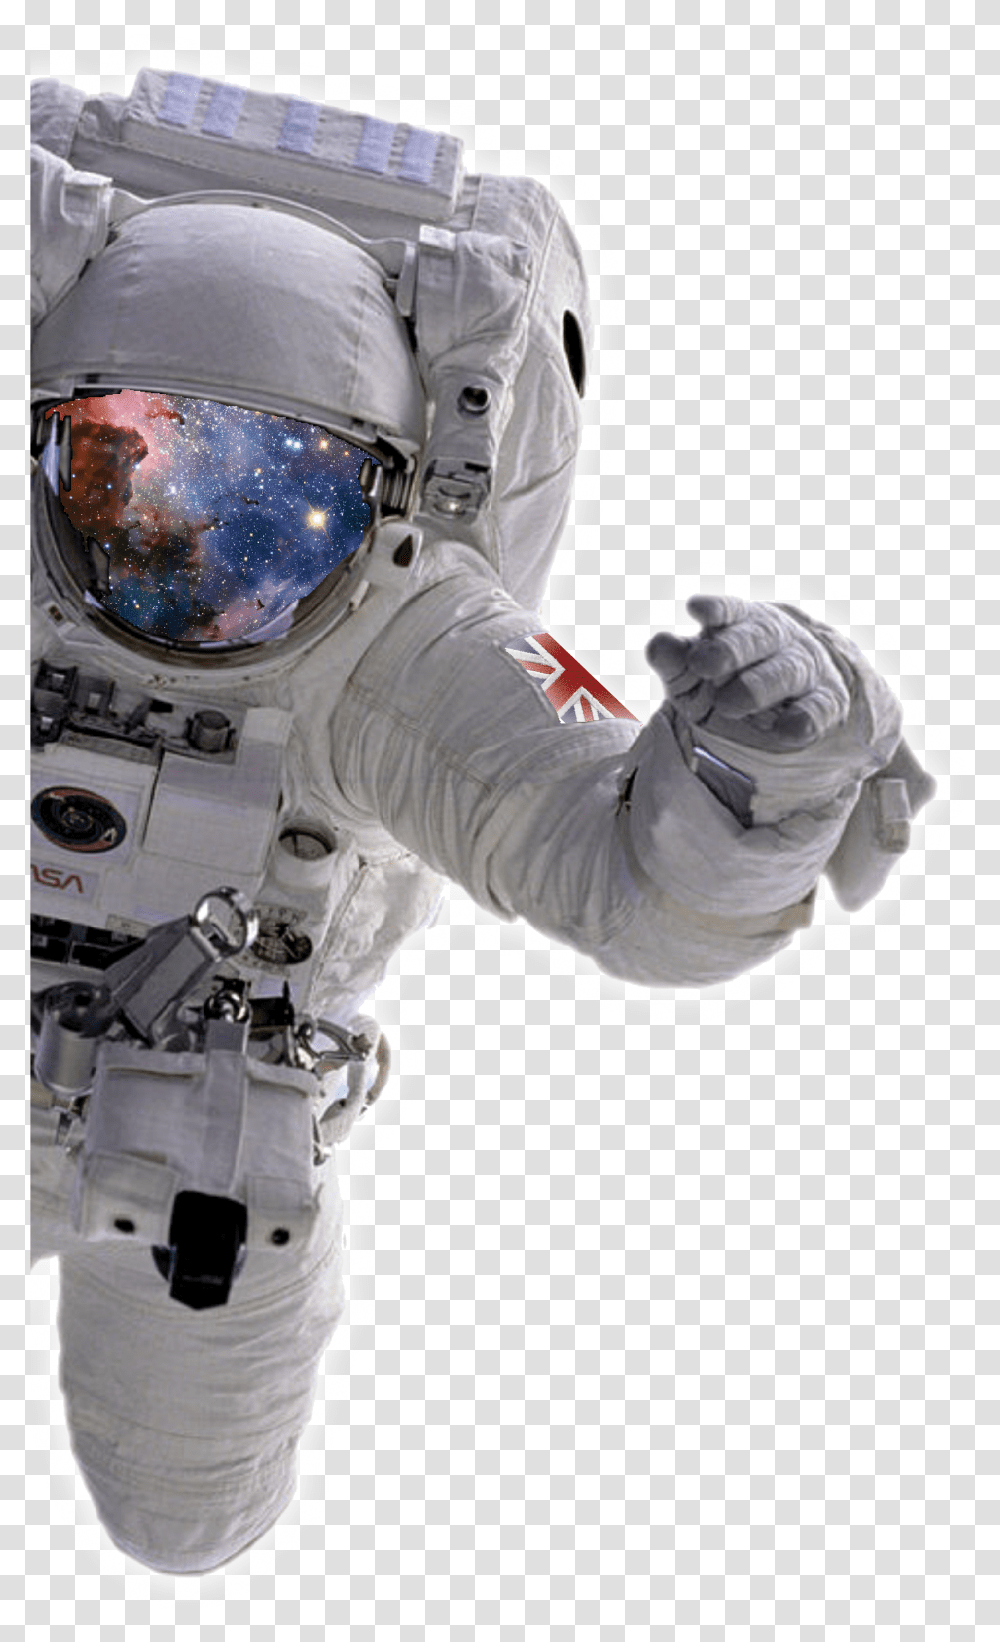 Download Hd Astronaut Astronaut In Space Astronaut In Space, Helmet, Clothing, Apparel, Person Transparent Png